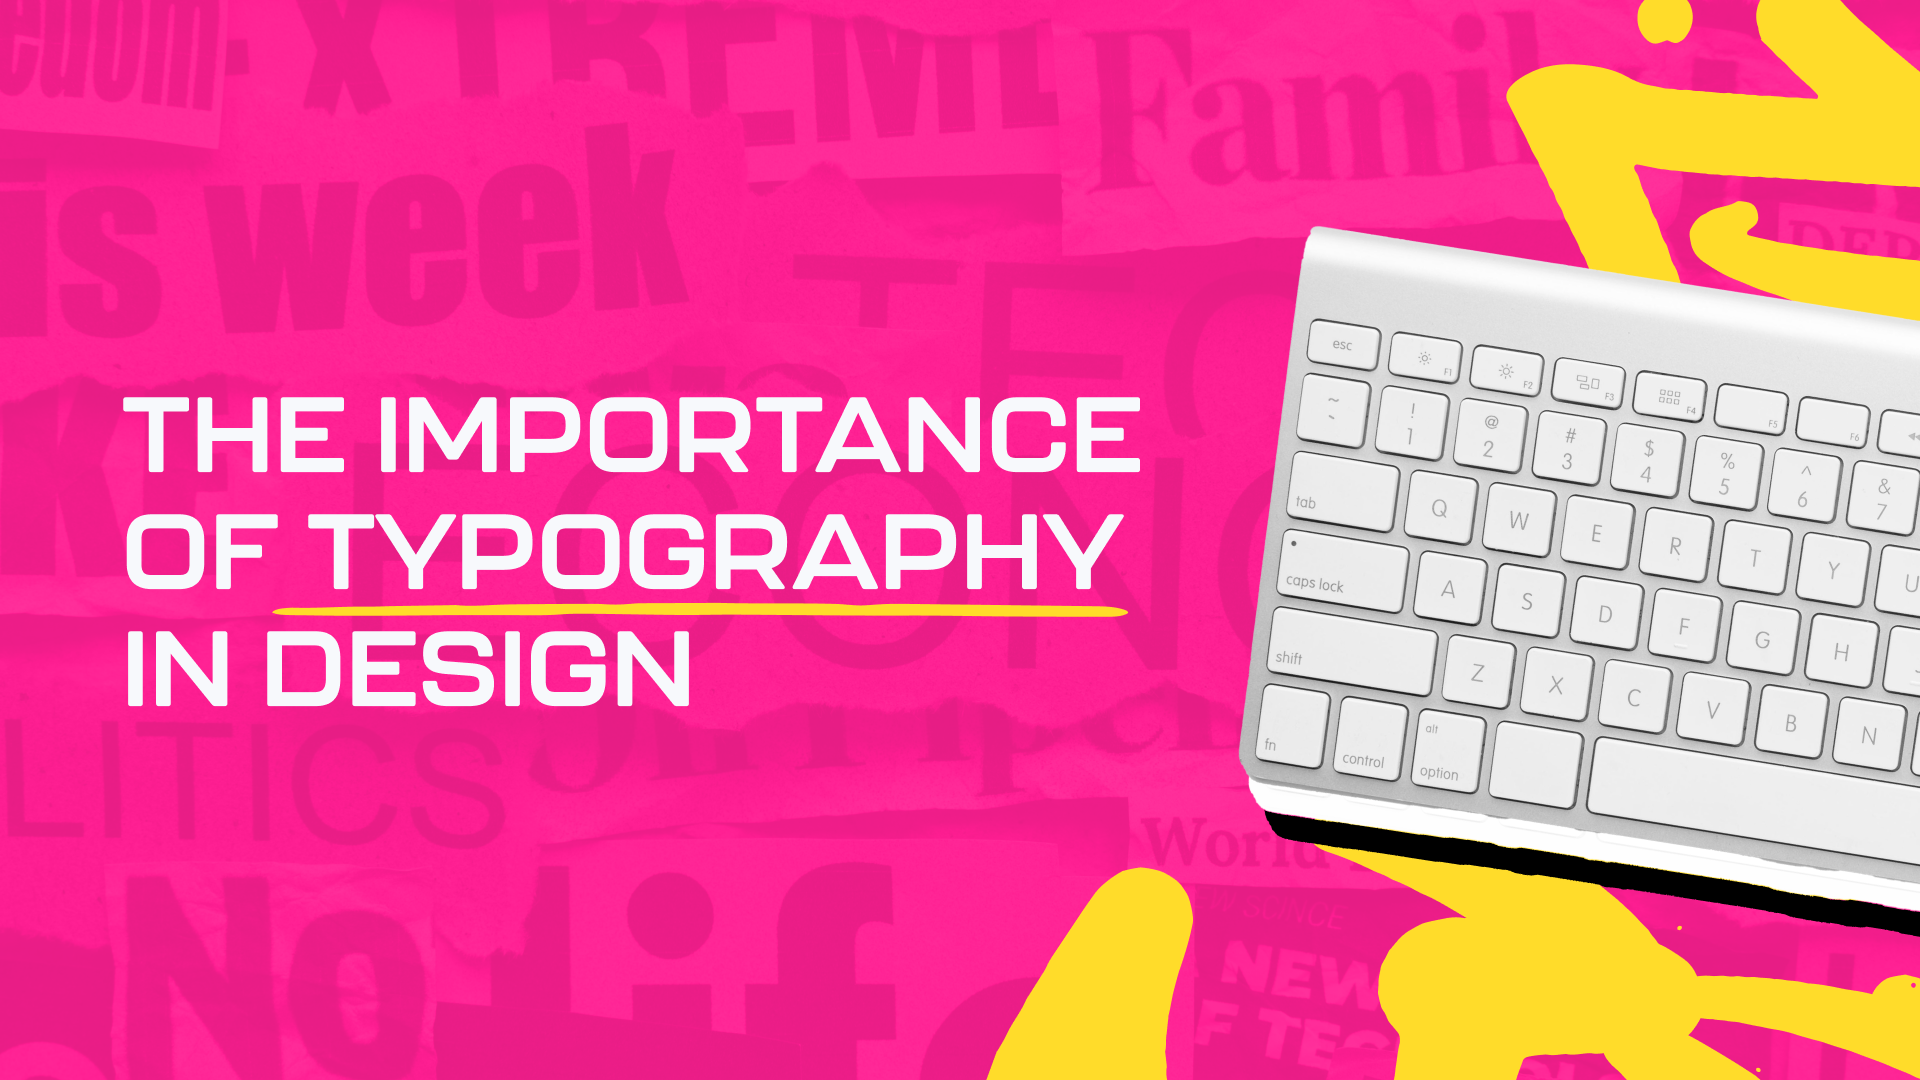 The Importance of Typography in Design